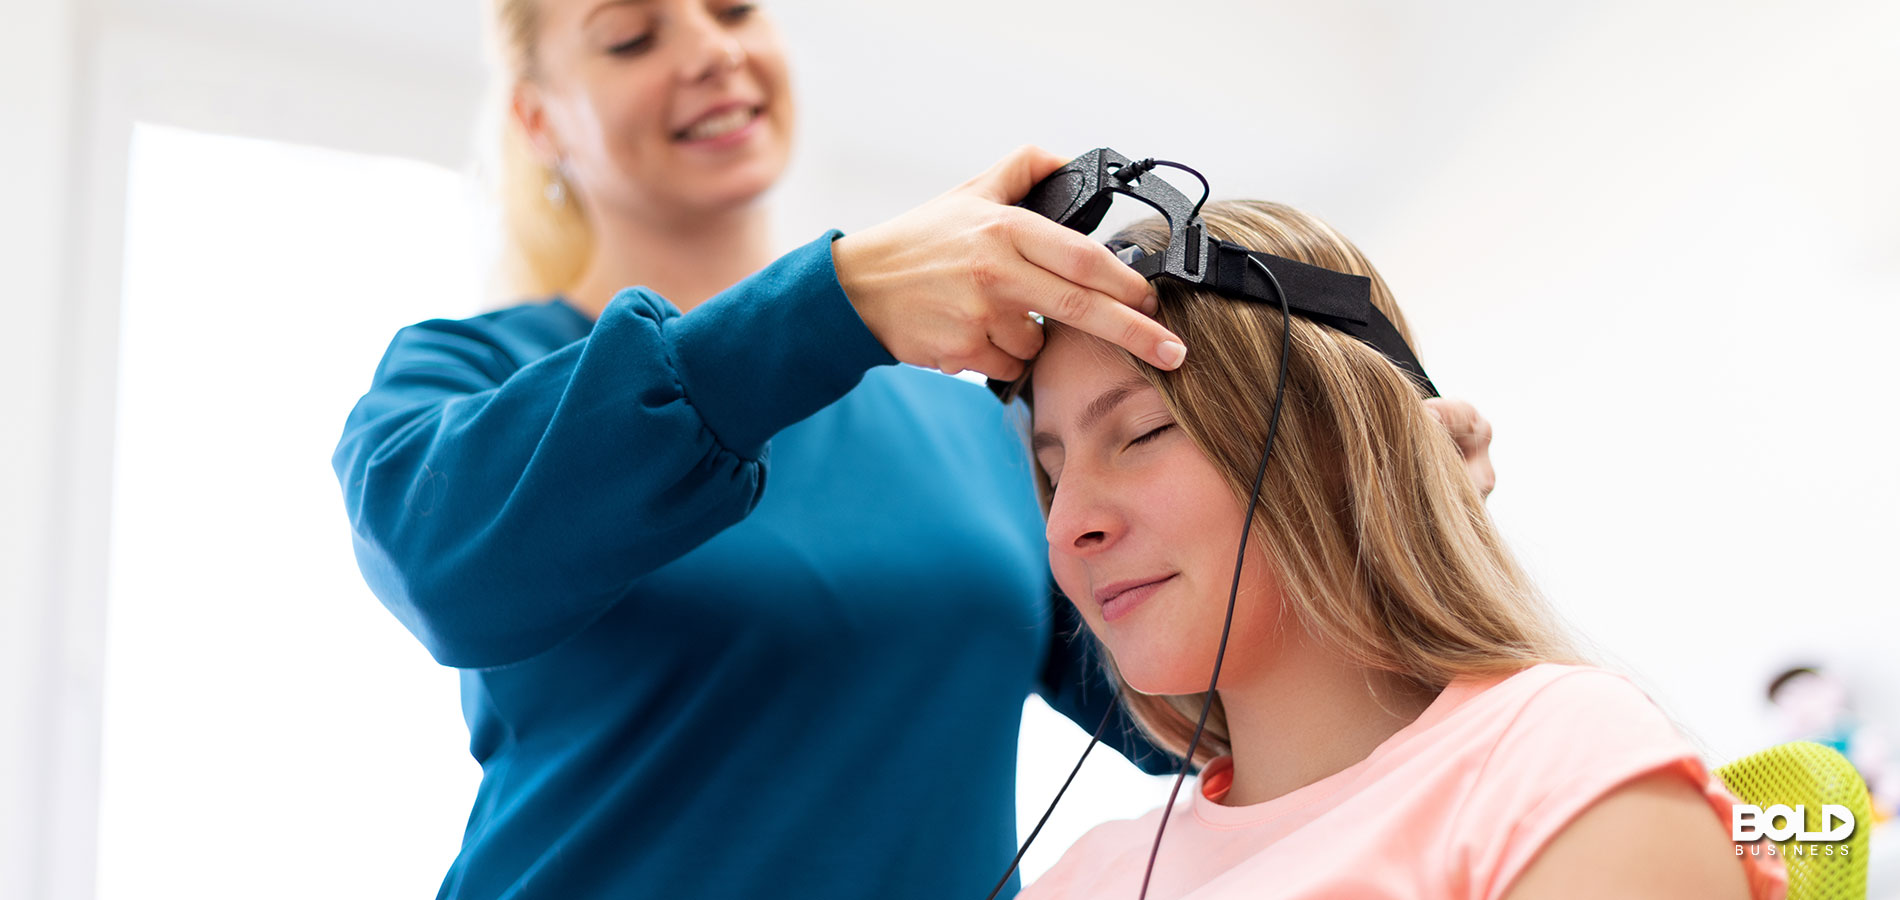 Tapping Into Neurofeedback for the Ultimate Zen Experience